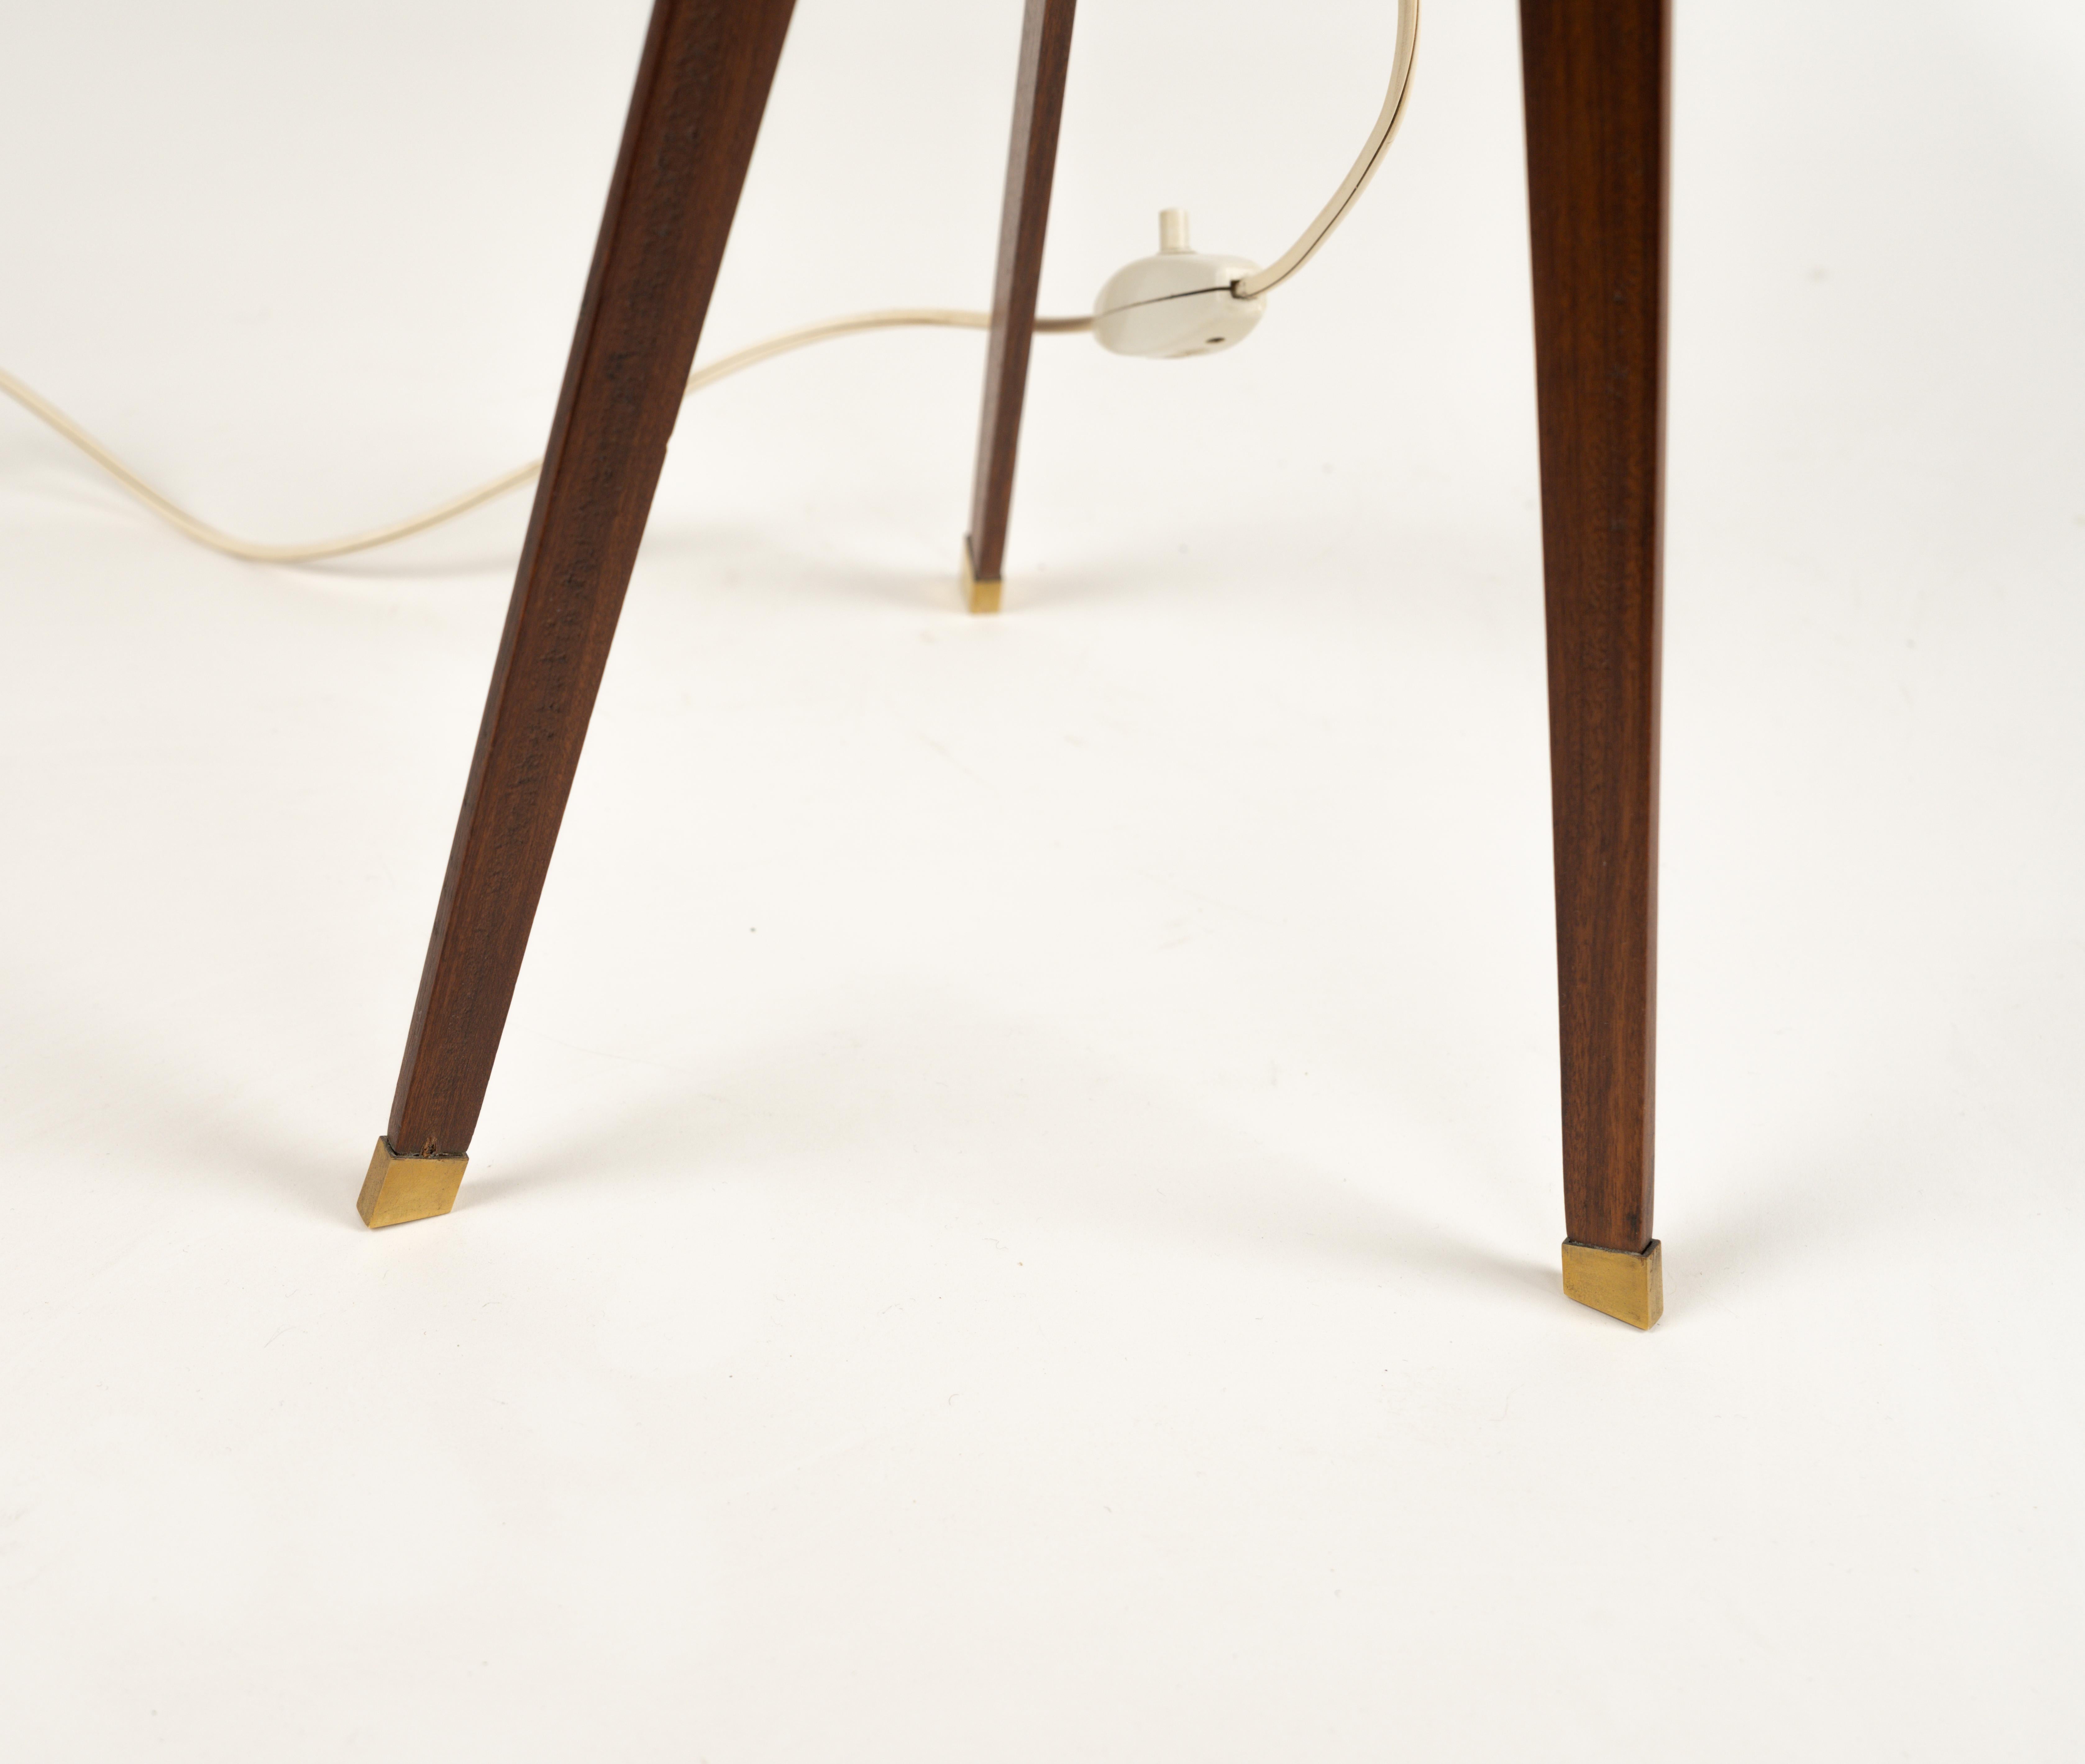 Tripod Table Lamp in Teak, Opaline Glass and Brass Stilnovo Style, Italy 1960s For Sale 5